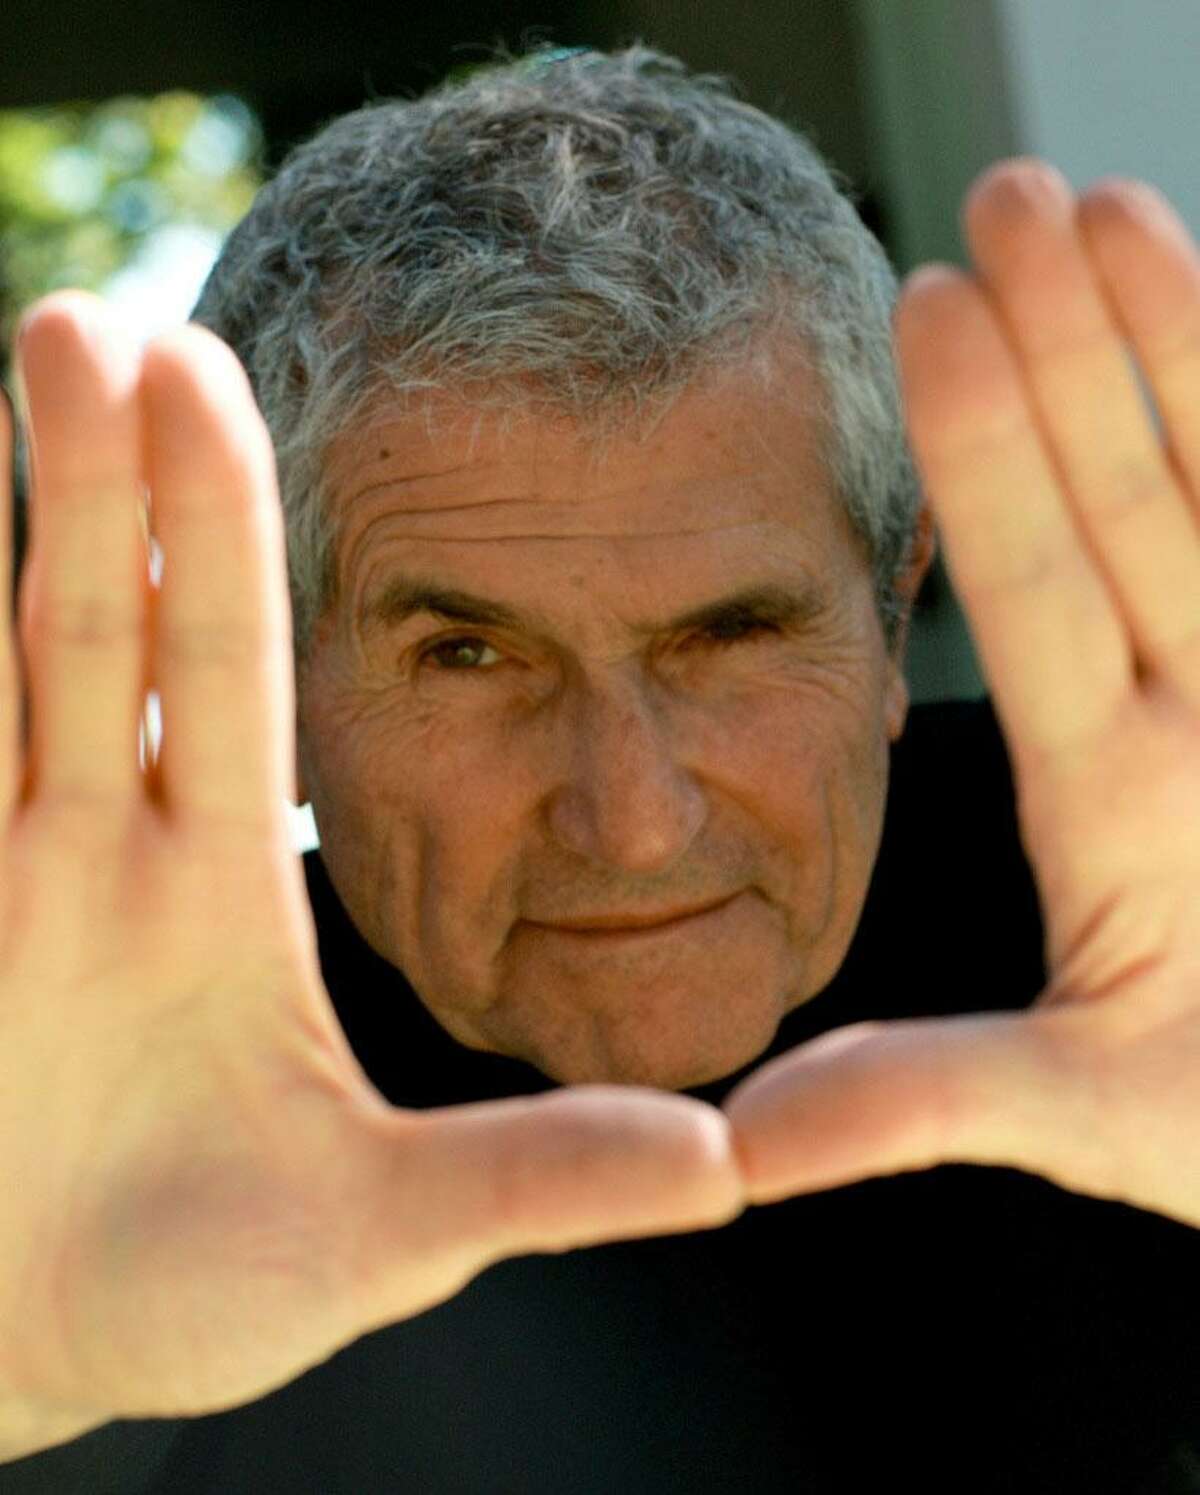 Acclaimed French filmmaker Claude Lelouch will appear at several events during the Alliance Française of Greenwich's Focus on French Cinema festival, Monday to April 4.